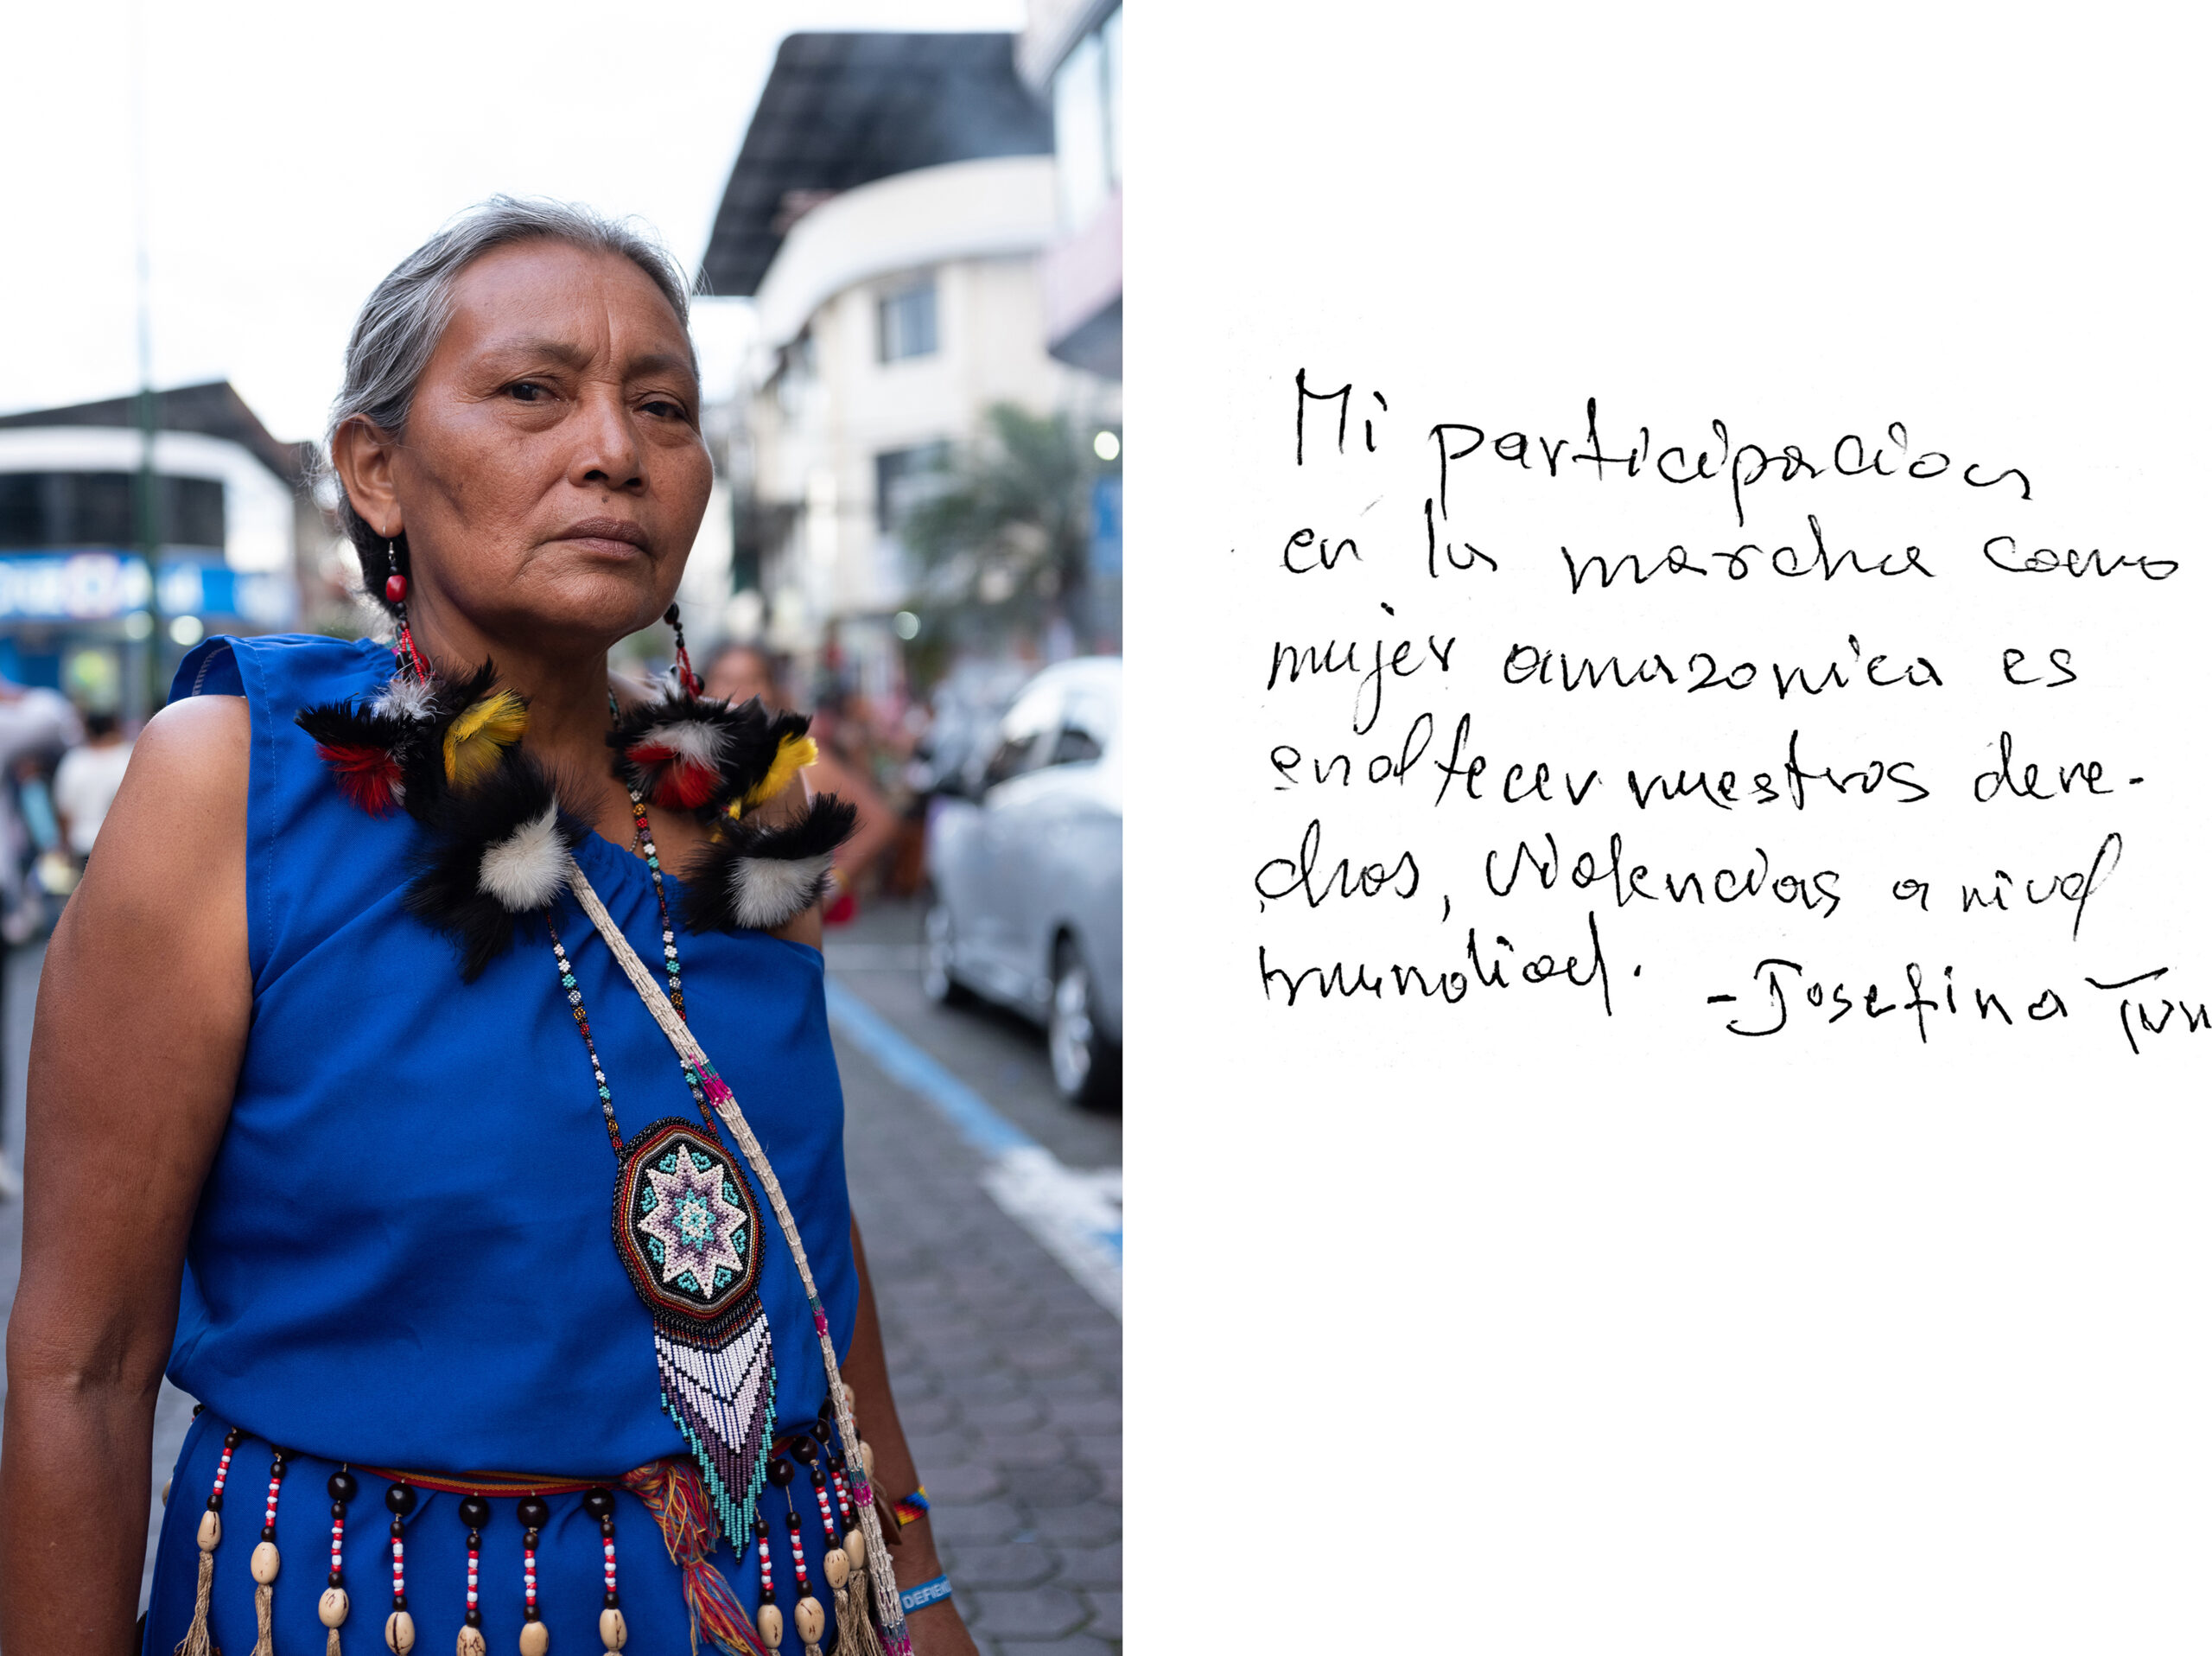 Ecuadorian Indigenous Women on why they march